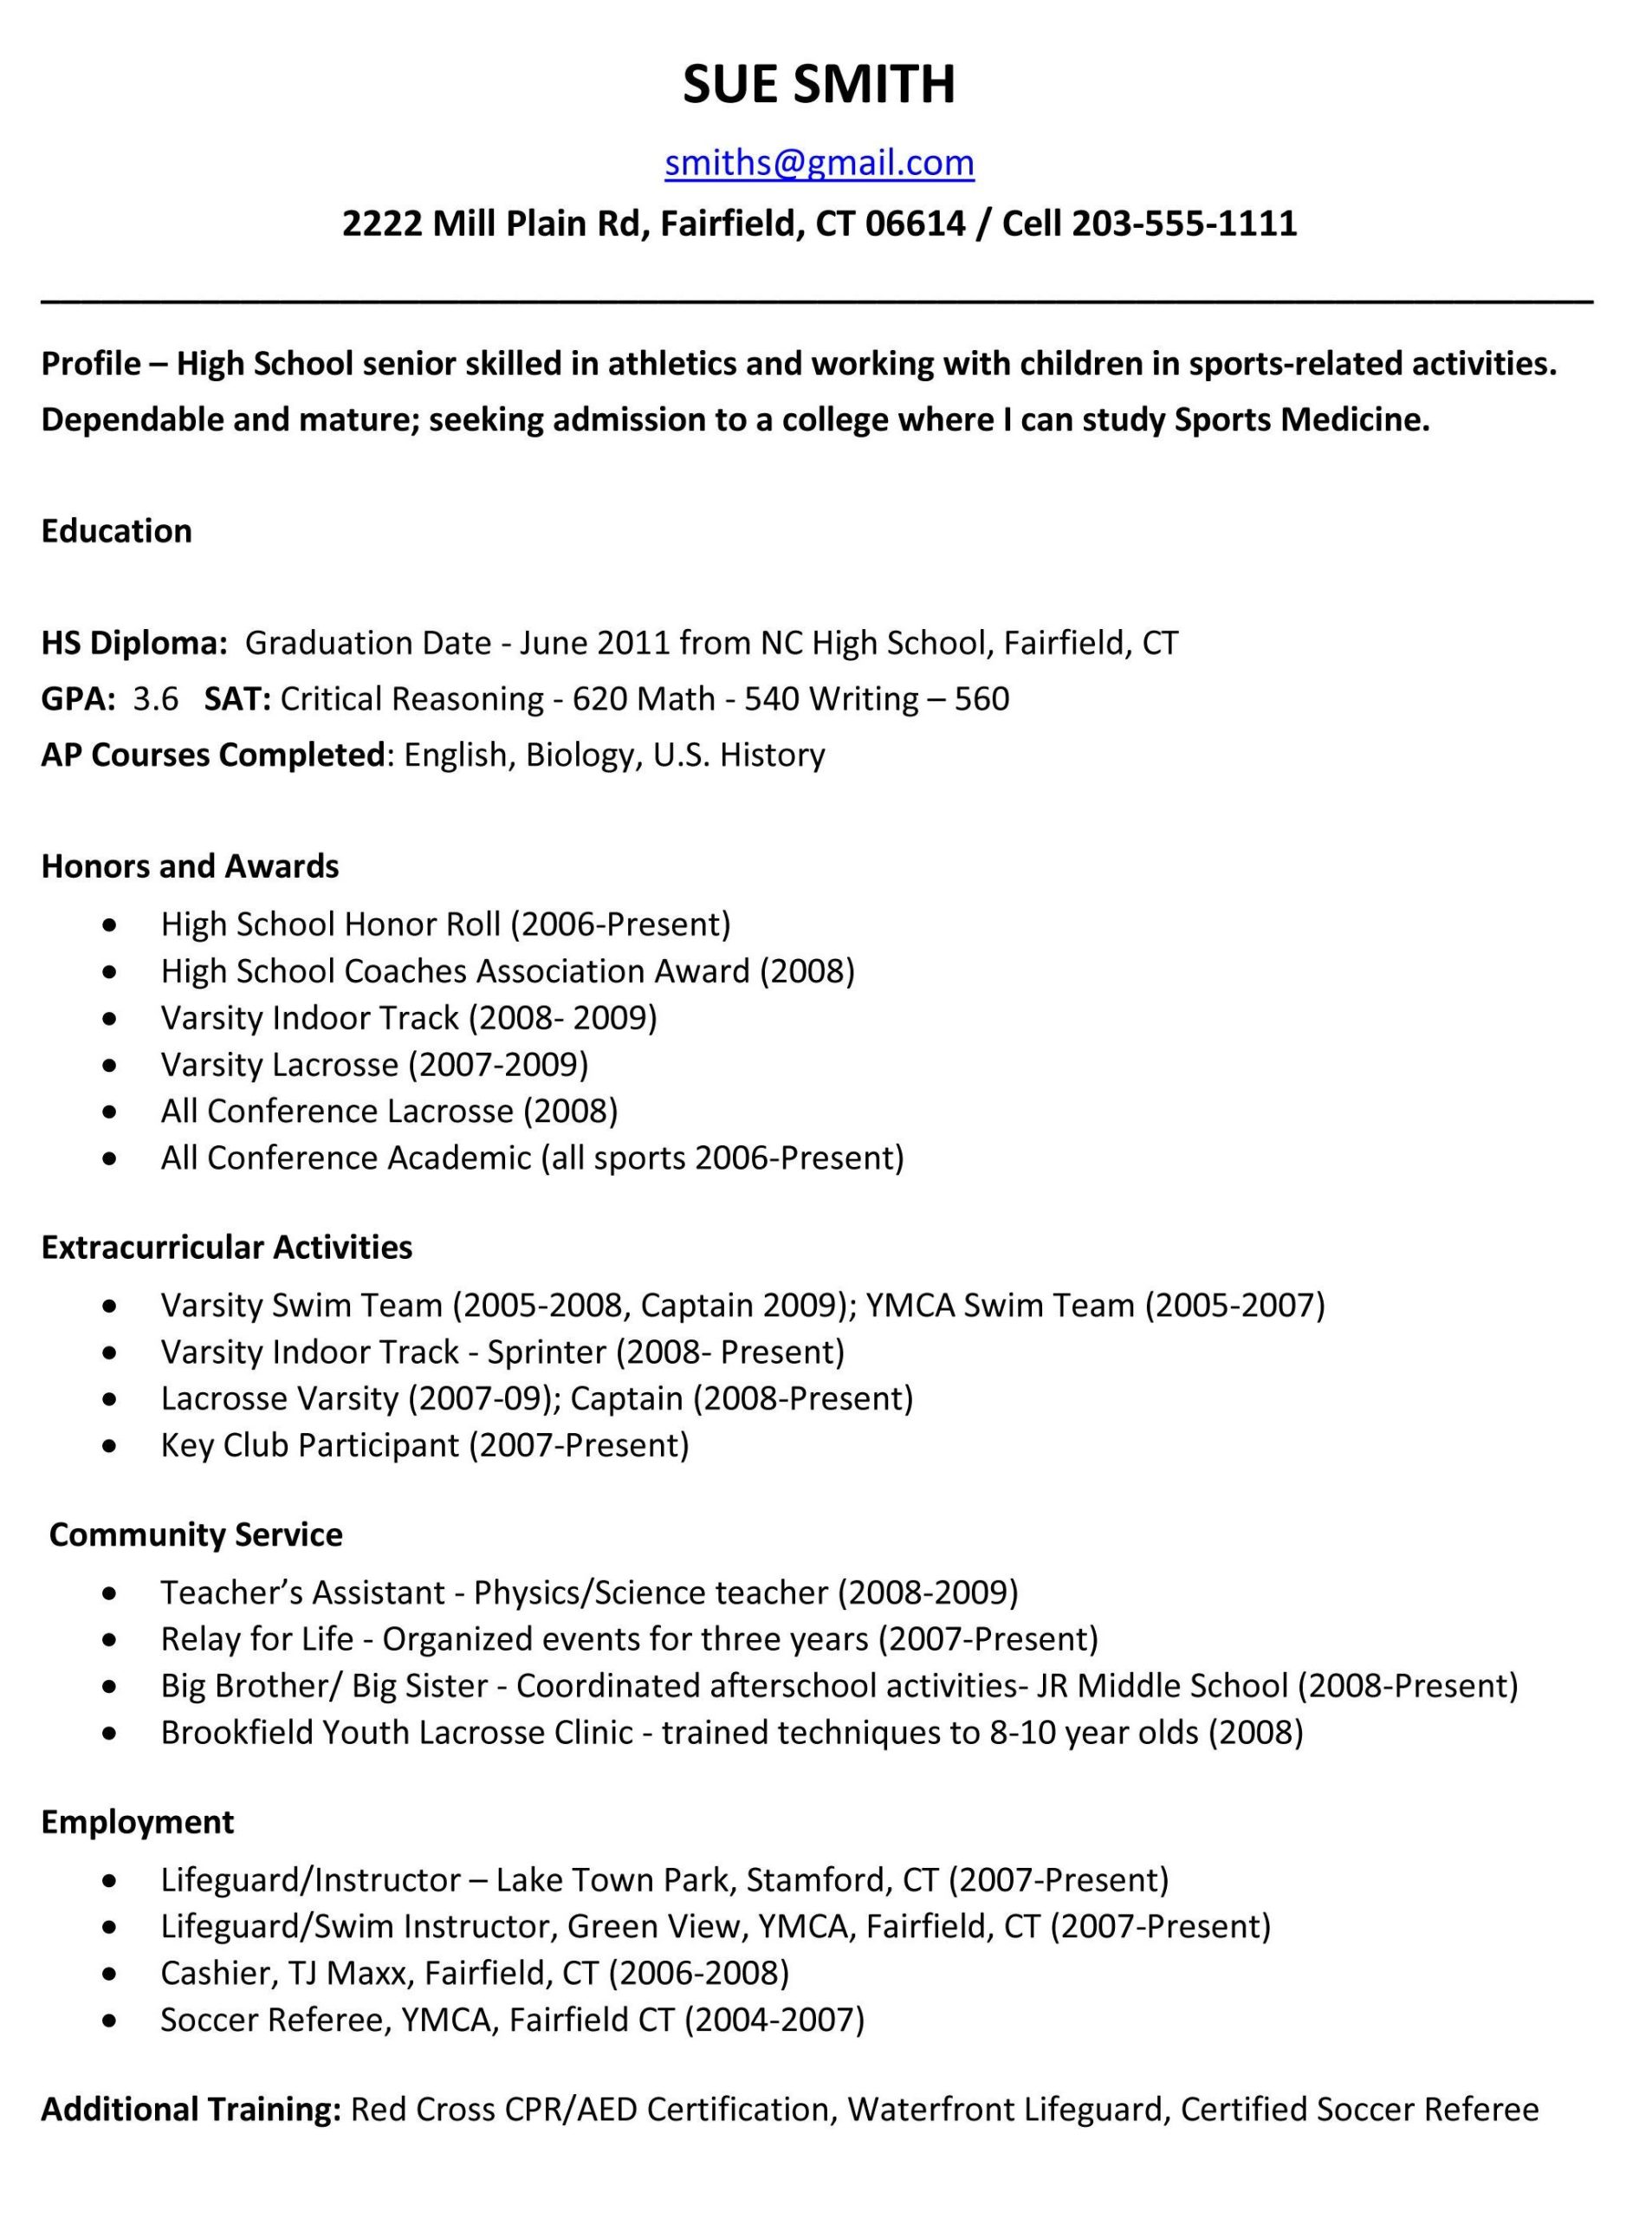 Sample Of A Resume for College Application High School Student Resume Template – Http://www.jobresume.website …